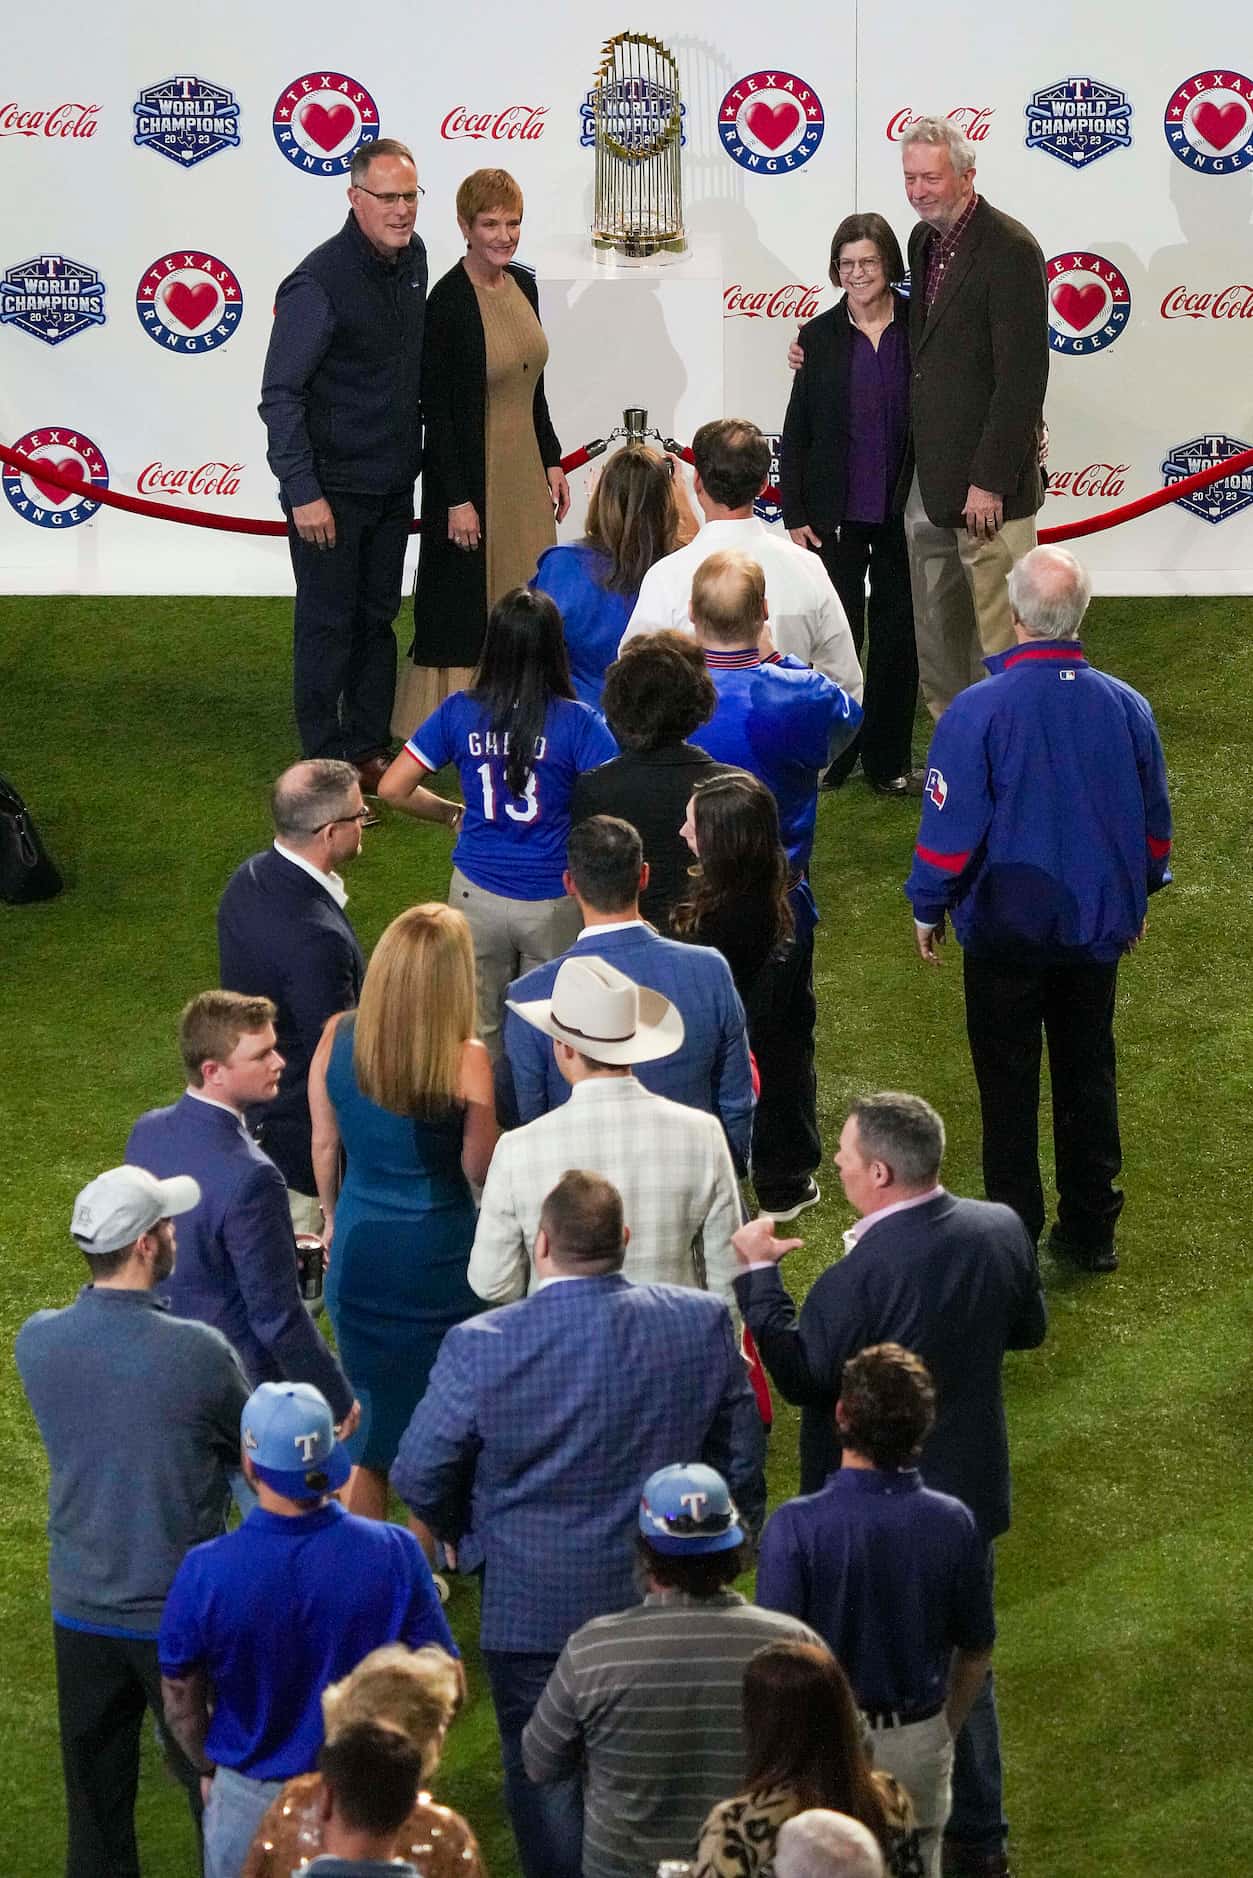 Guests wait in line to take a photo with the Commissioner’s Trophy during the Texas Rangers...